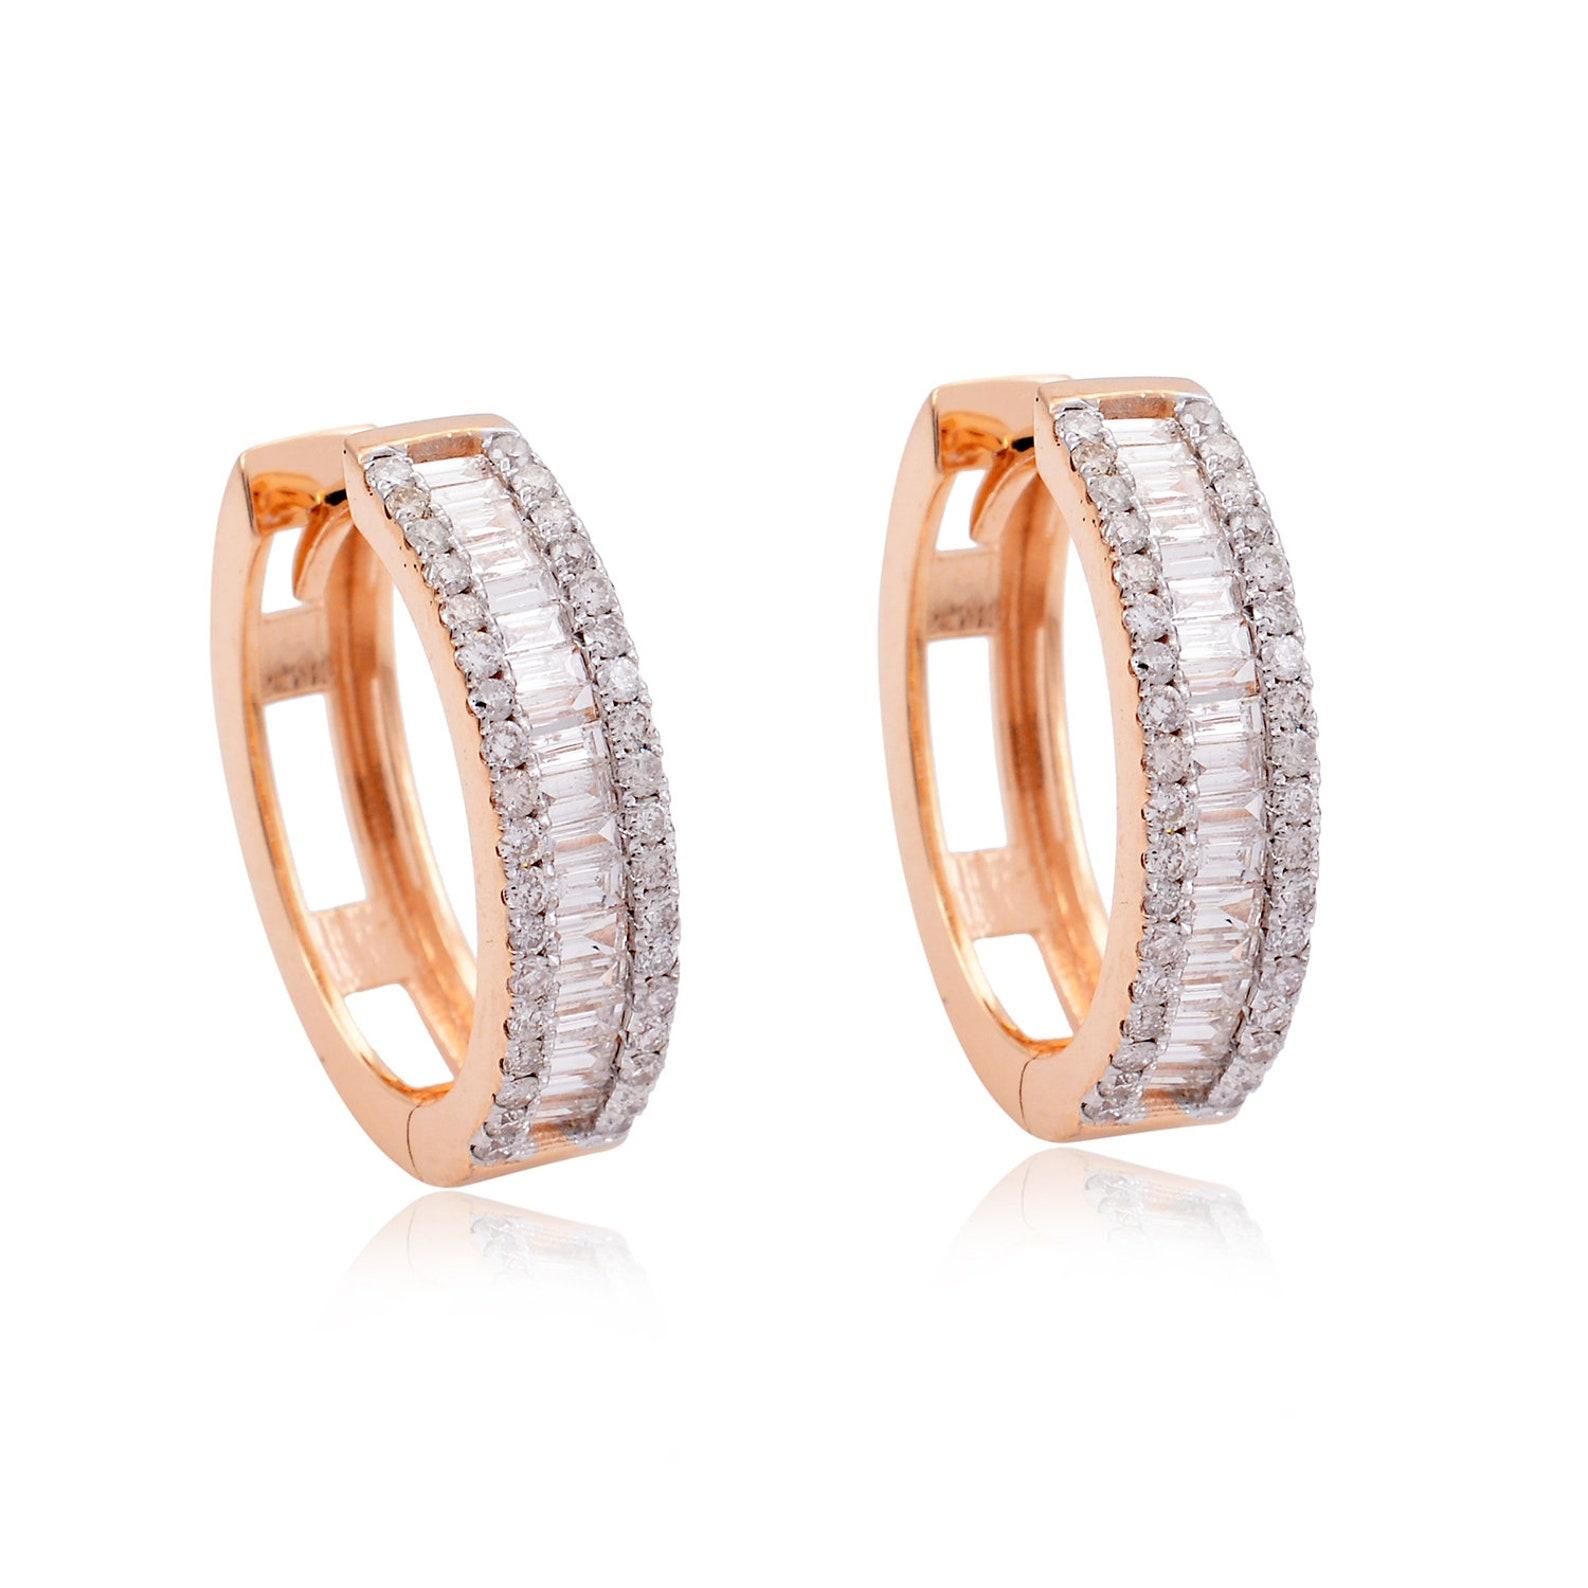 Cast in 14-karat gold, these beautiful hoop earrings are hand set with 1.60 carats of baguette sparkling diamonds. 

FOLLOW  MEGHNA JEWELS storefront to view the latest collection & exclusive pieces.  Meghna Jewels is proudly rated as a Top Seller